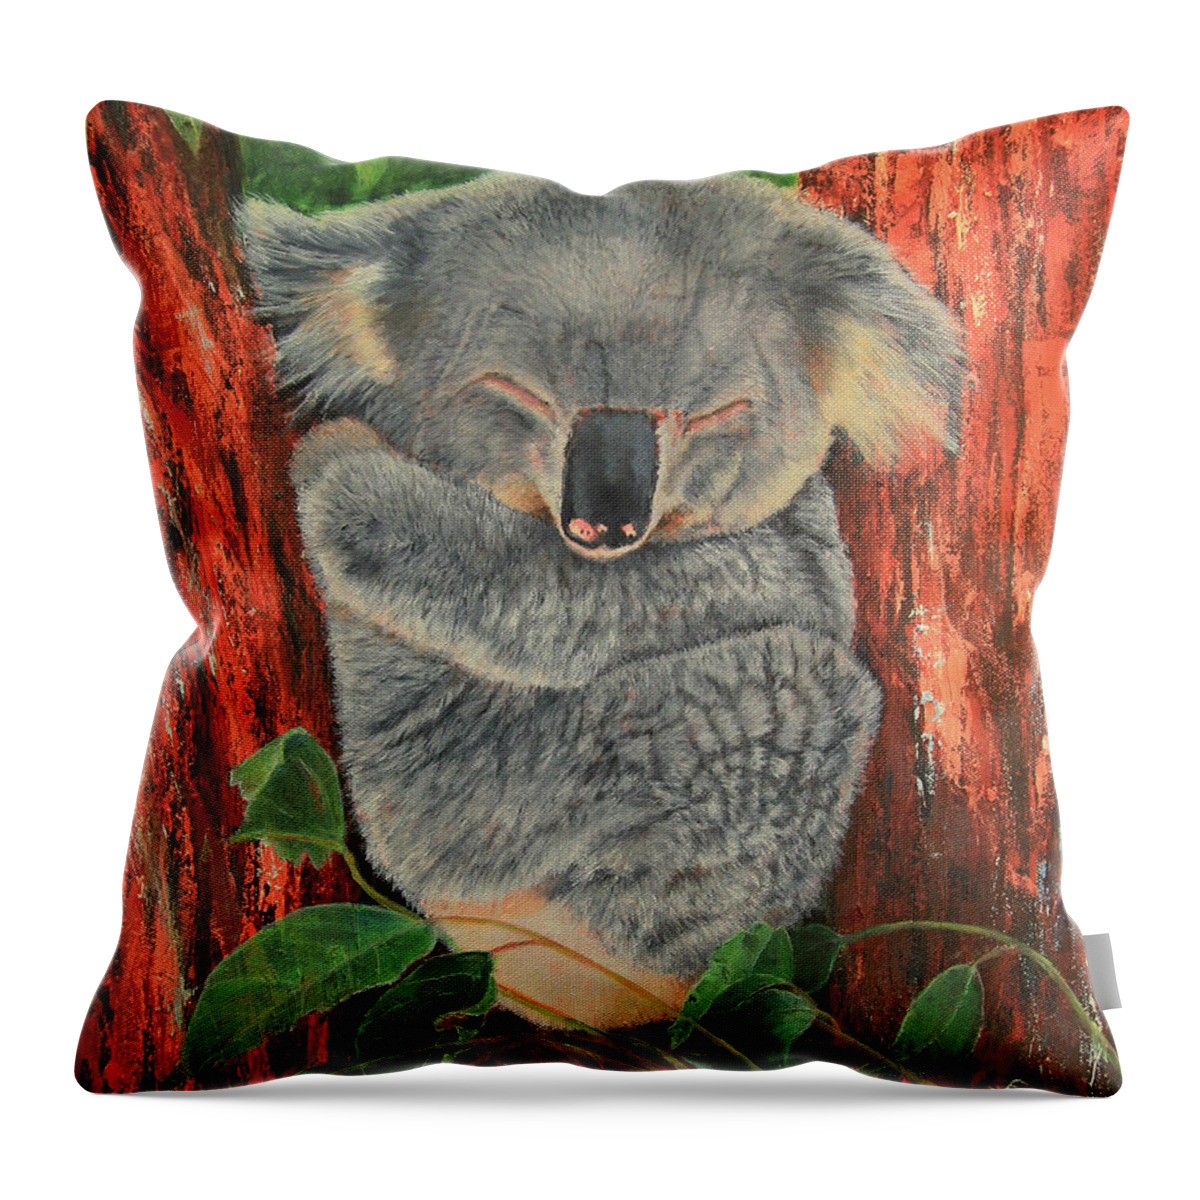 Koala Throw Pillow featuring the painting Sleeping Koala by Jeanette French